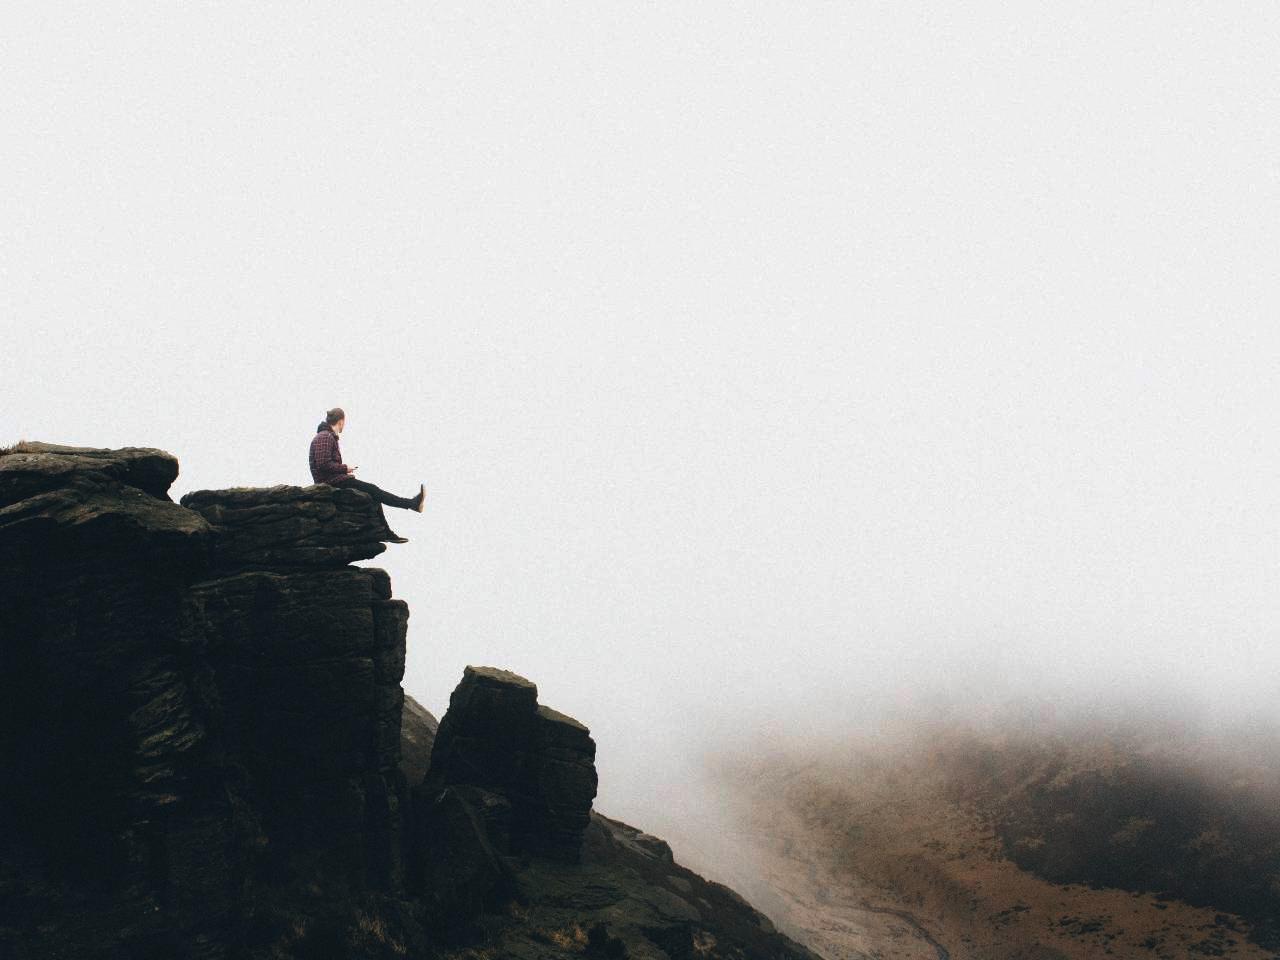 Image of a man sitting on the edge of a rock-face cliff. He is kicking his feet up and fog is directly beneath him.